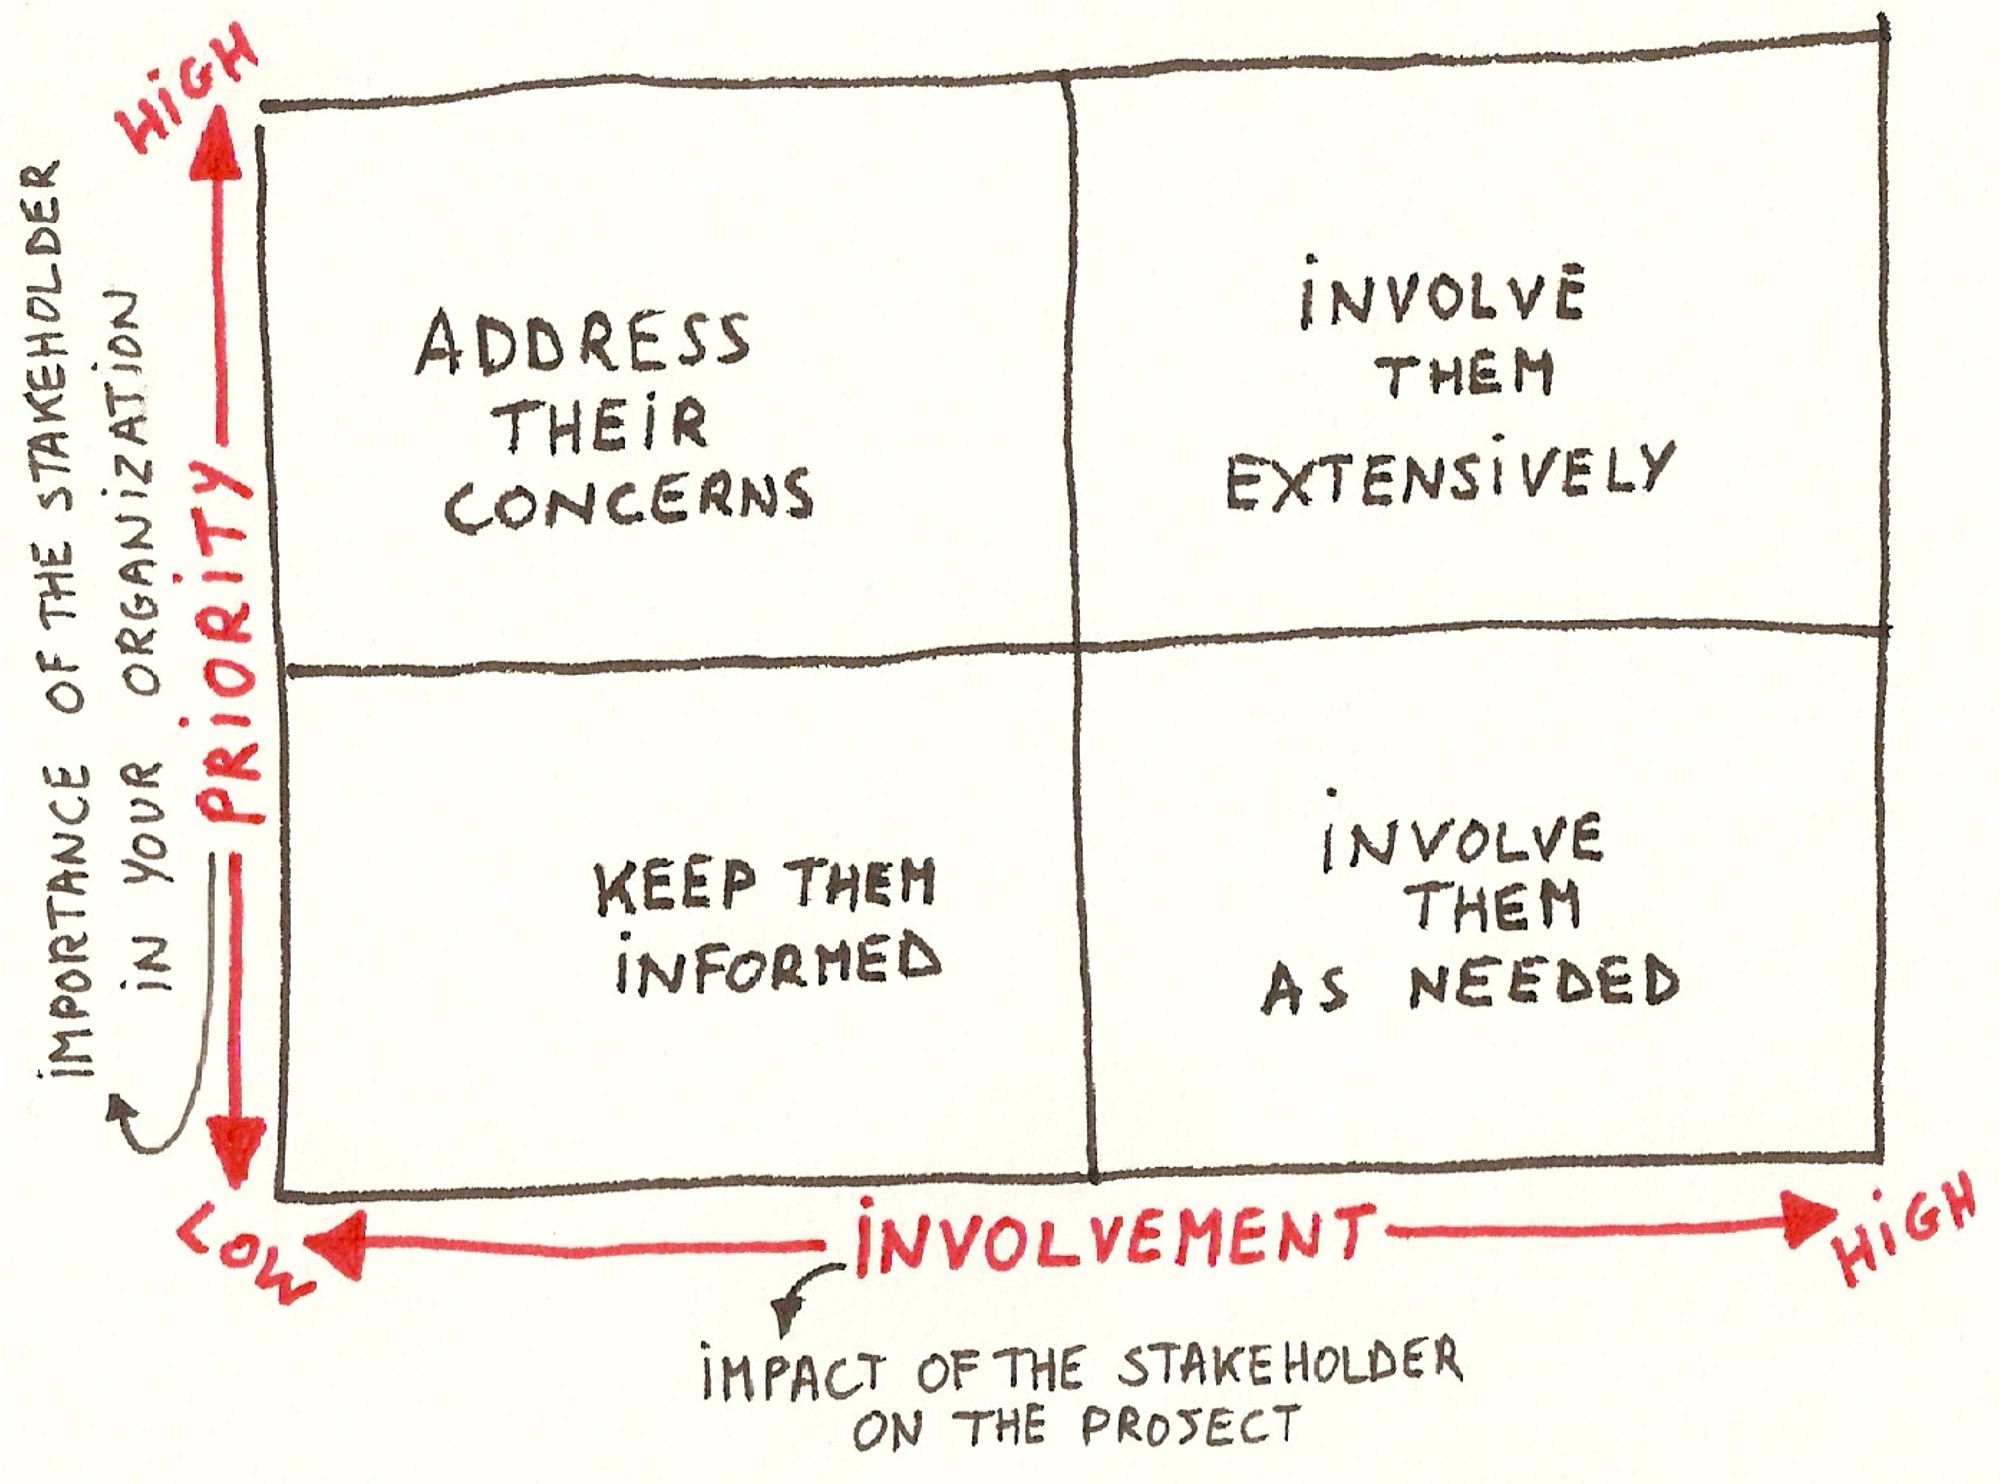 Example of a stakeholder map (Source: Interaction-Design.org / Luc Galoppin)